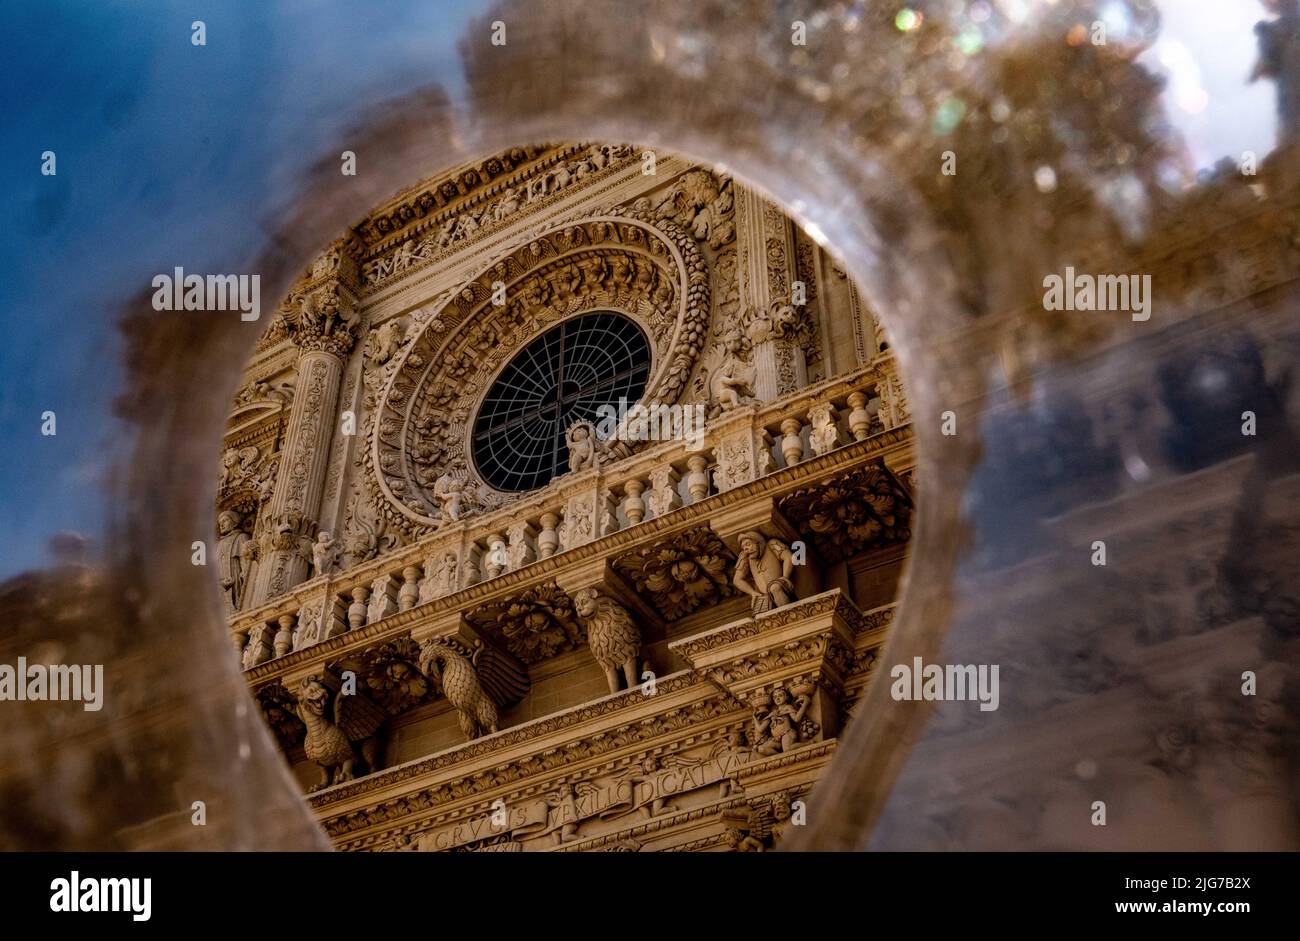 Distorted and abstract view of a Baroque Catholic Church and its rose window along with animal and Saracens holding up the facade Stock Photo